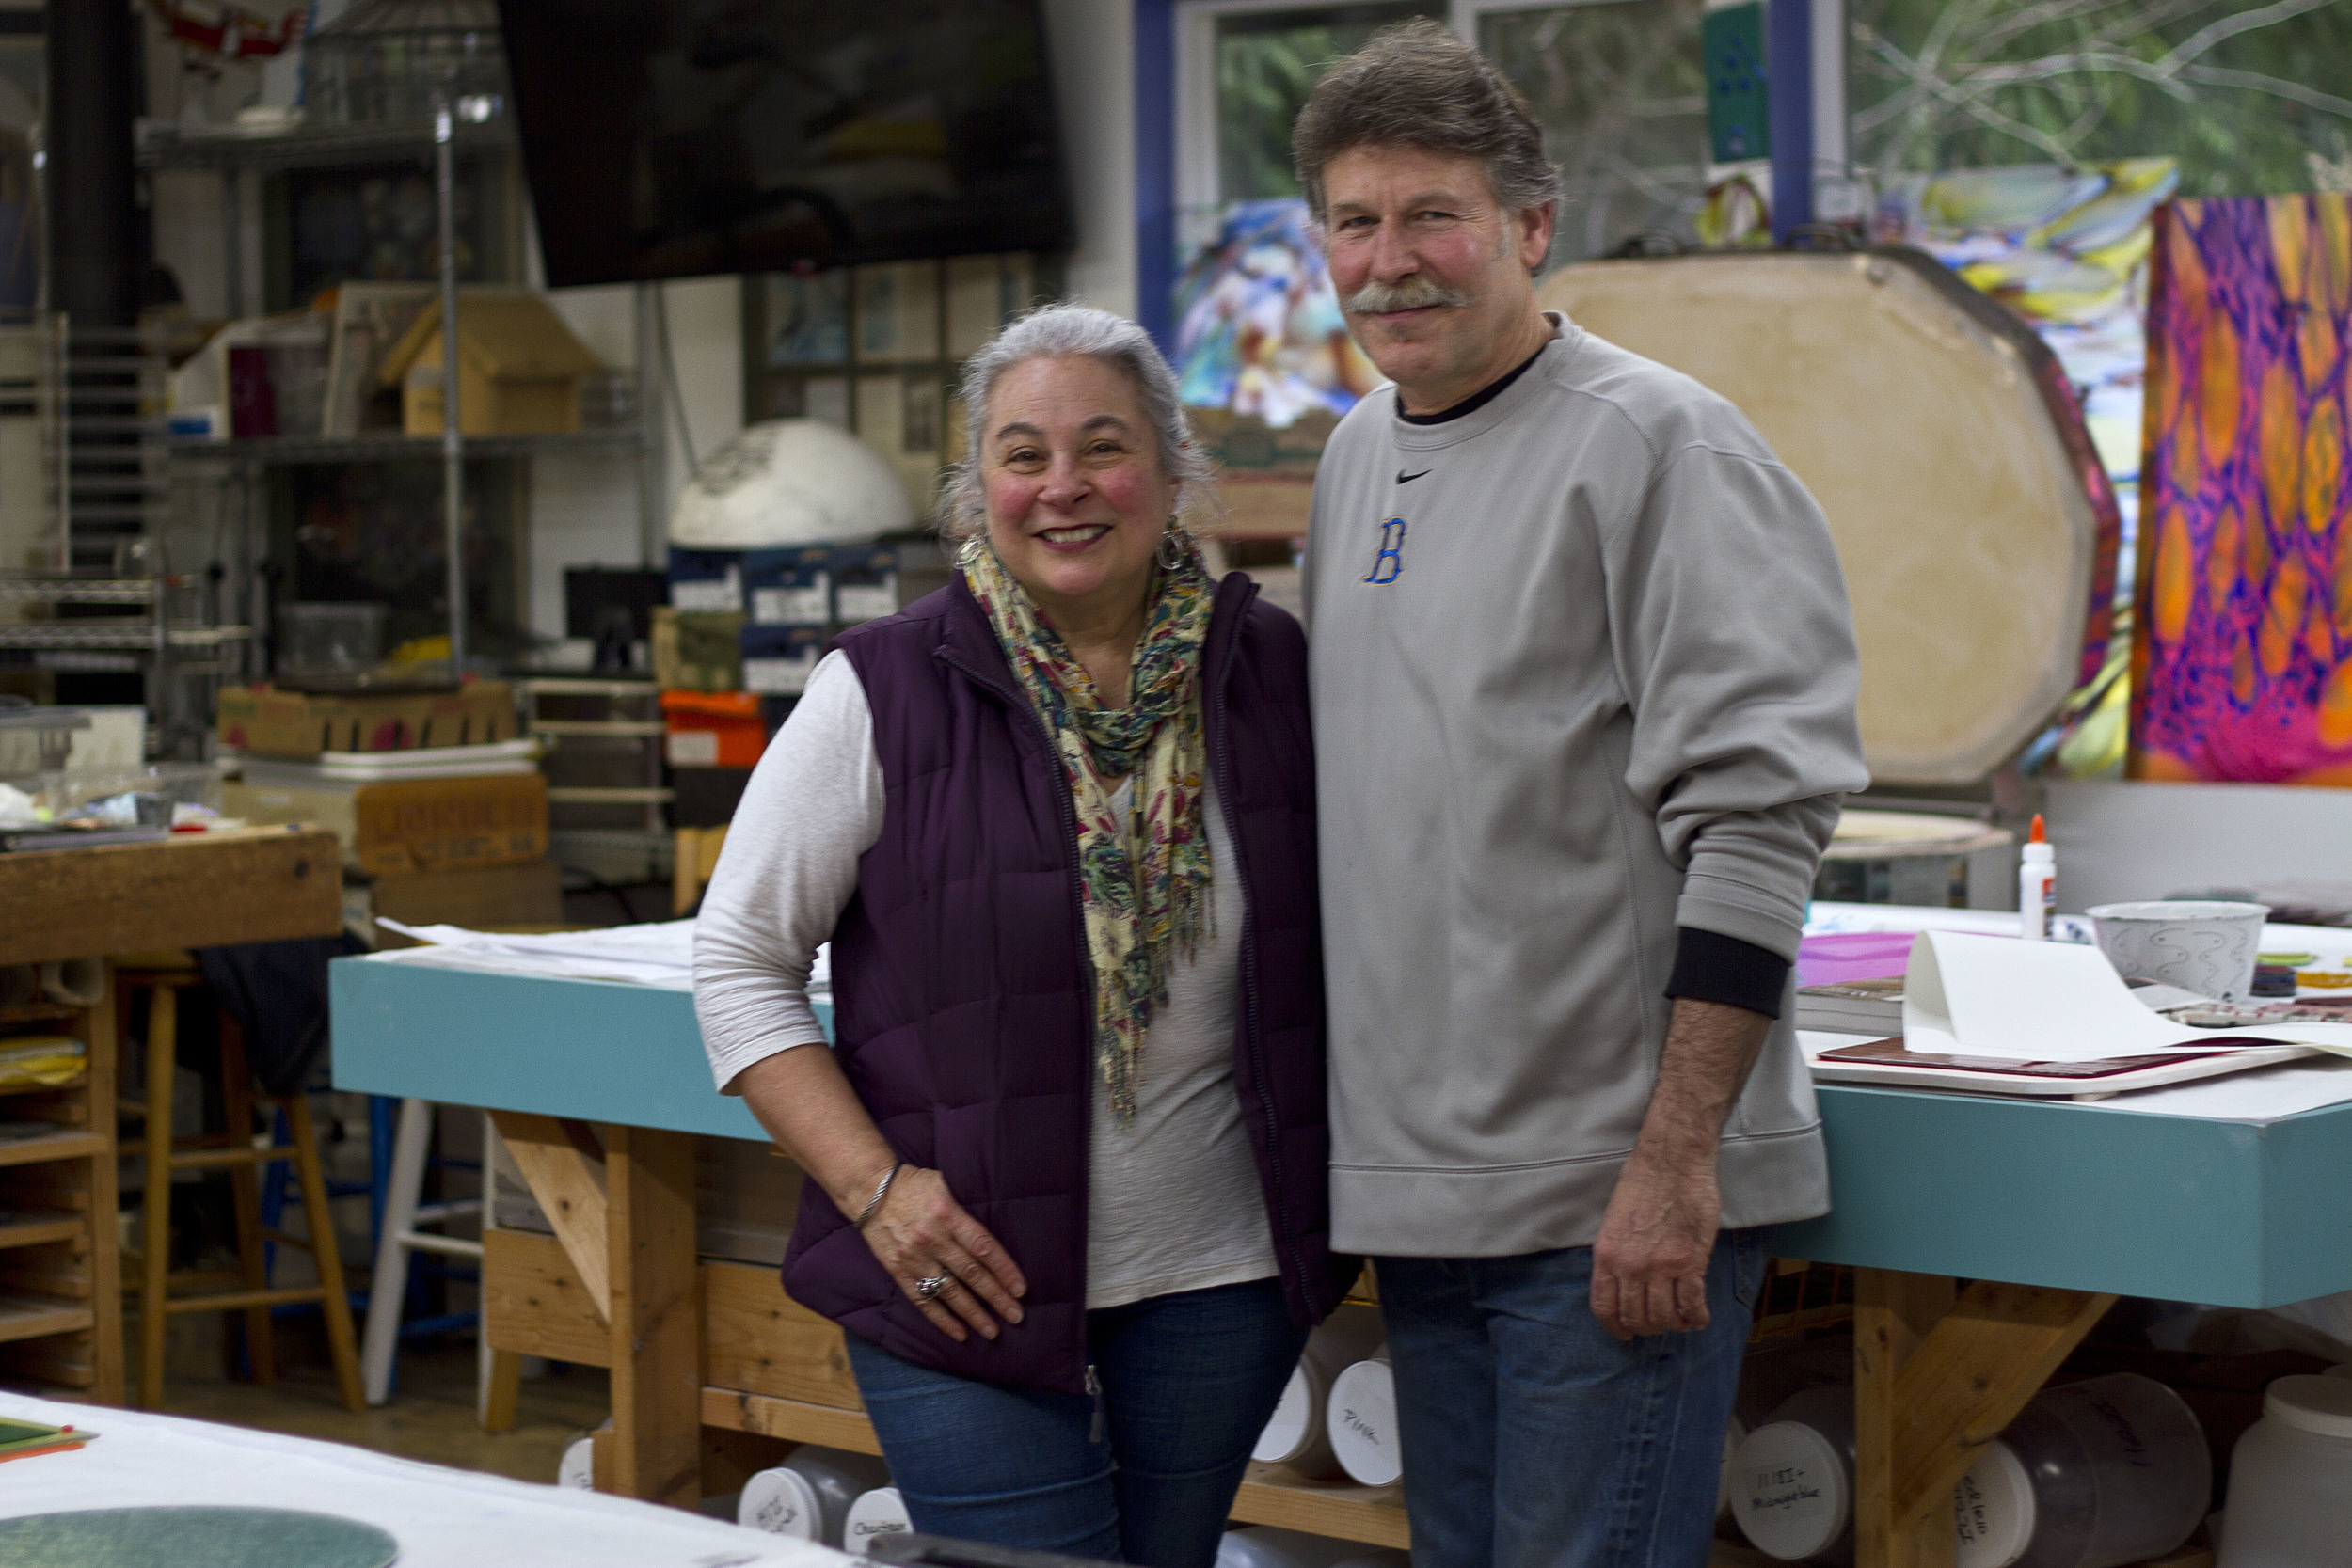  2015 Island Treasure Award recipients Diane Bonciolini and Gregg Mesmer of Mesolini Glass. Many of their pieces have become community staples on permanent display in prominent locales around Bainbridge Island, including the Waypoint park entrance in